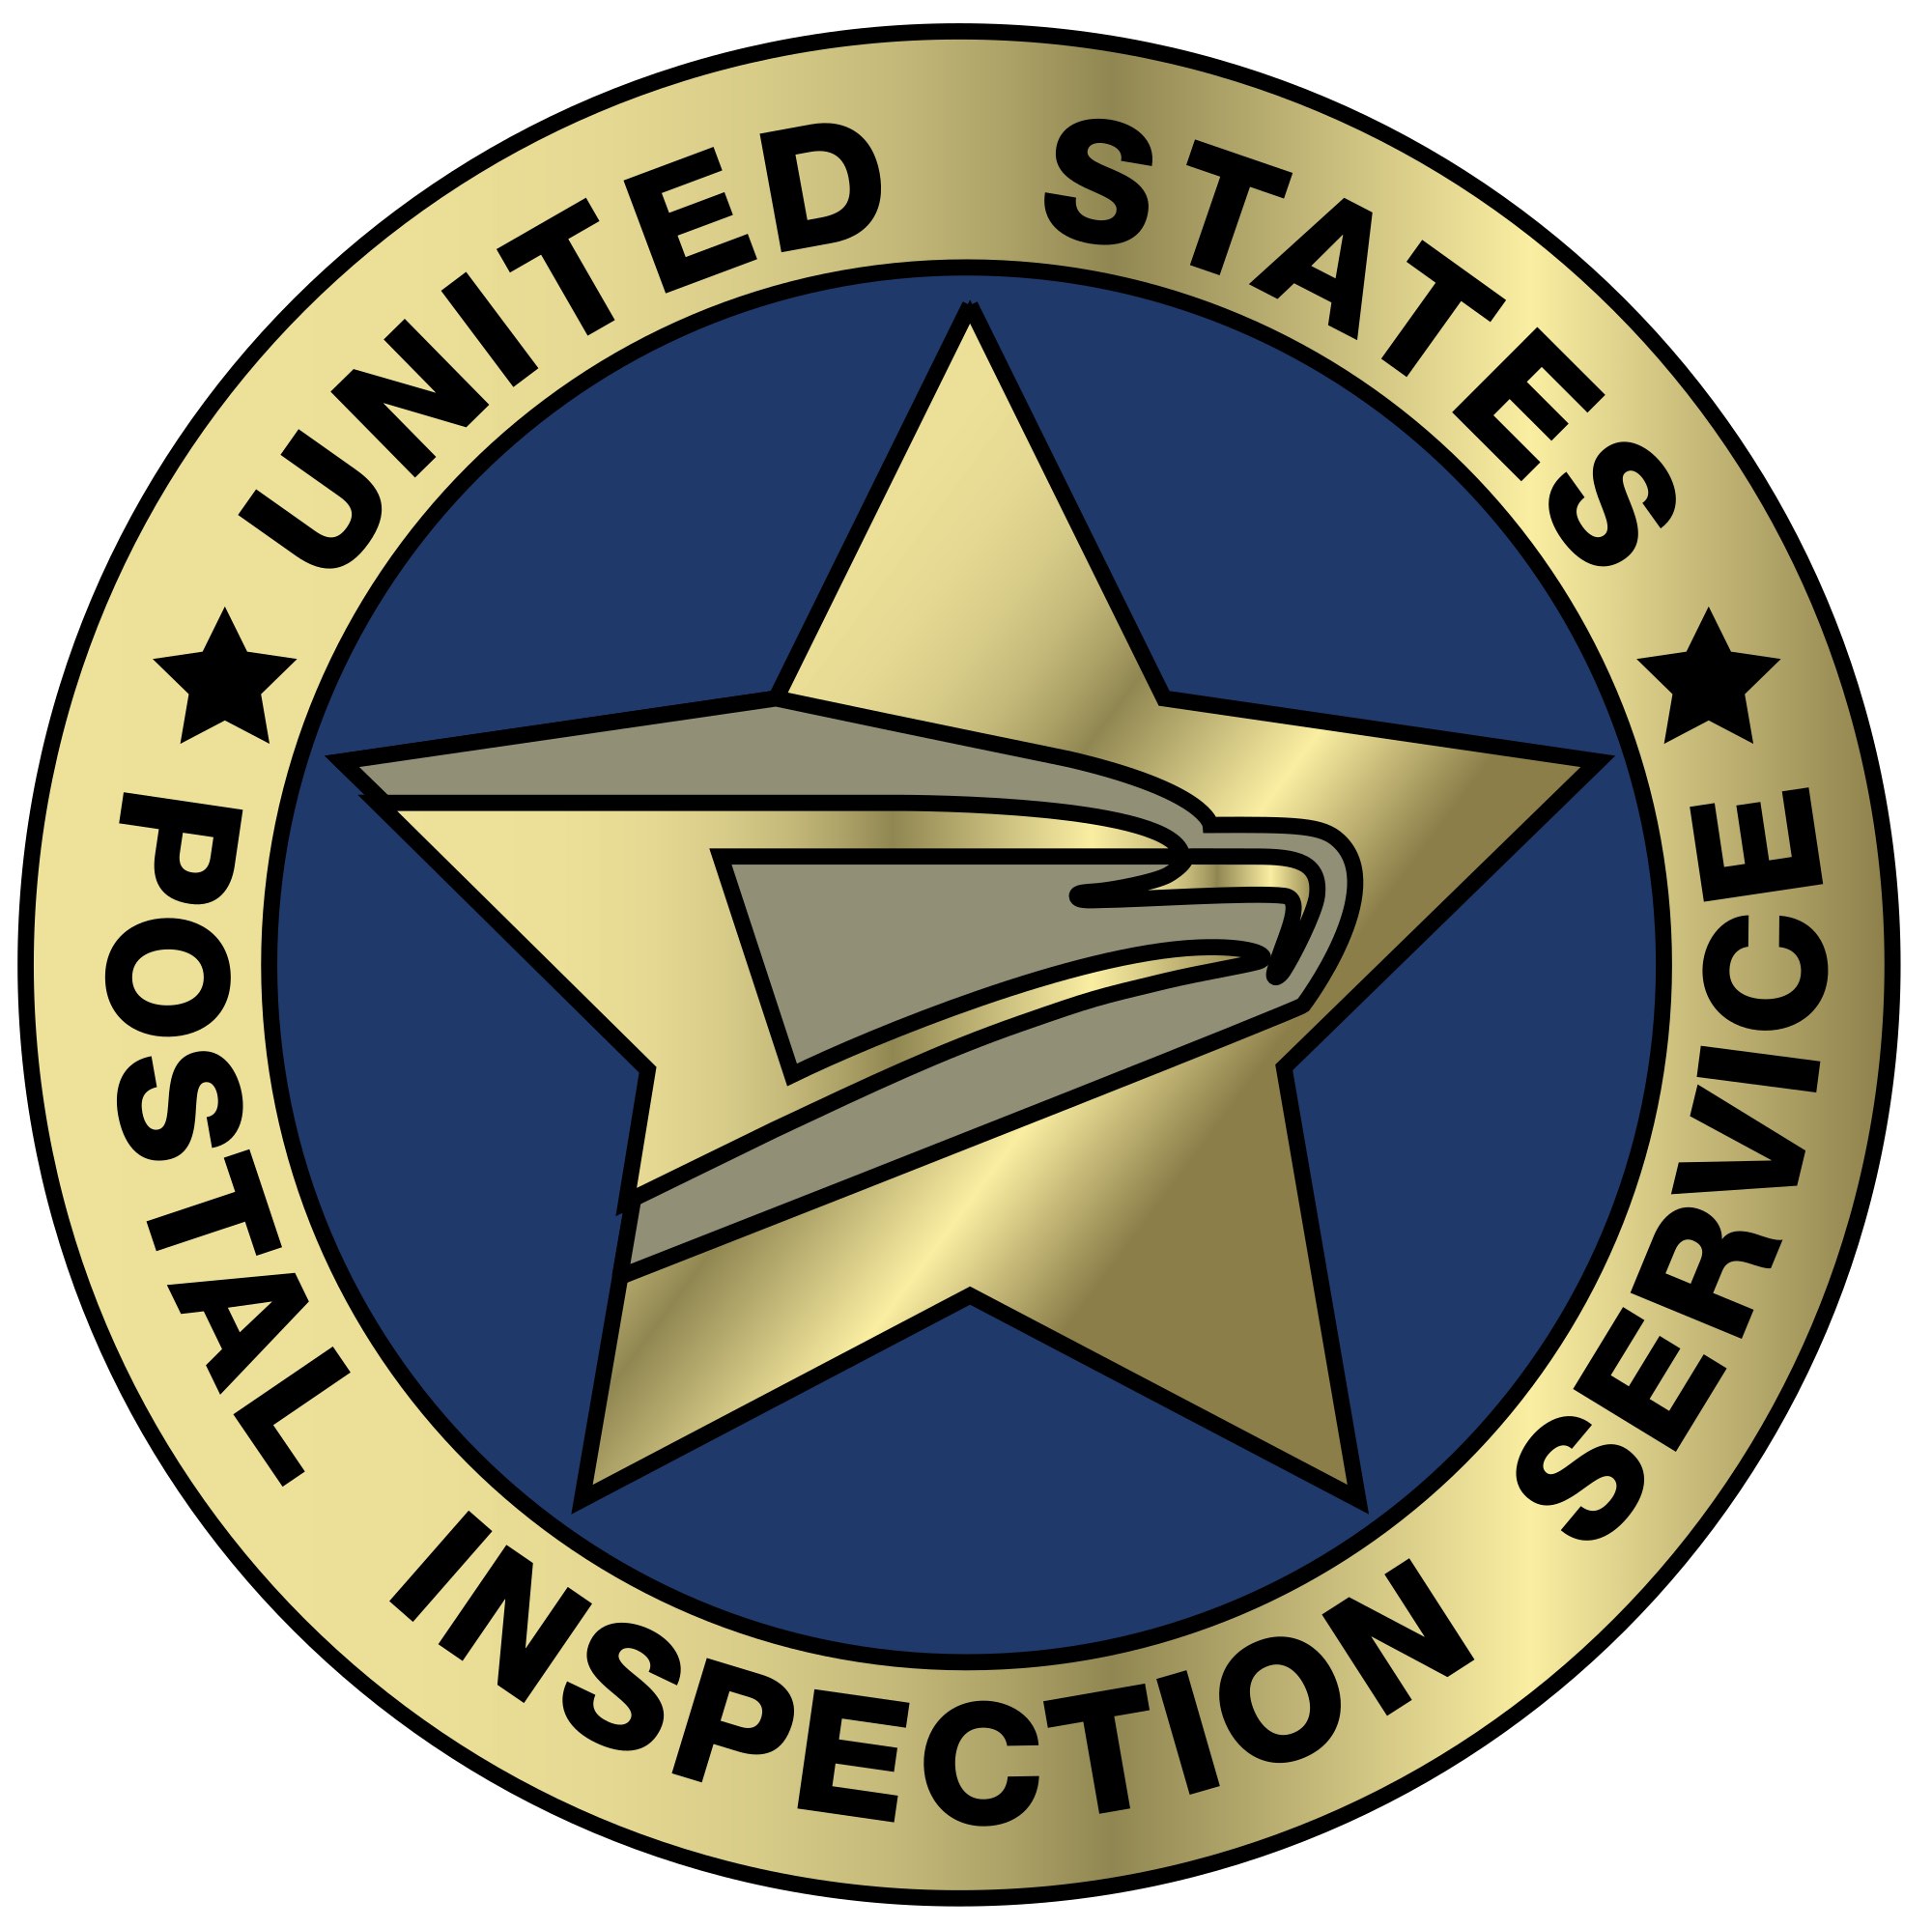 “Inspection